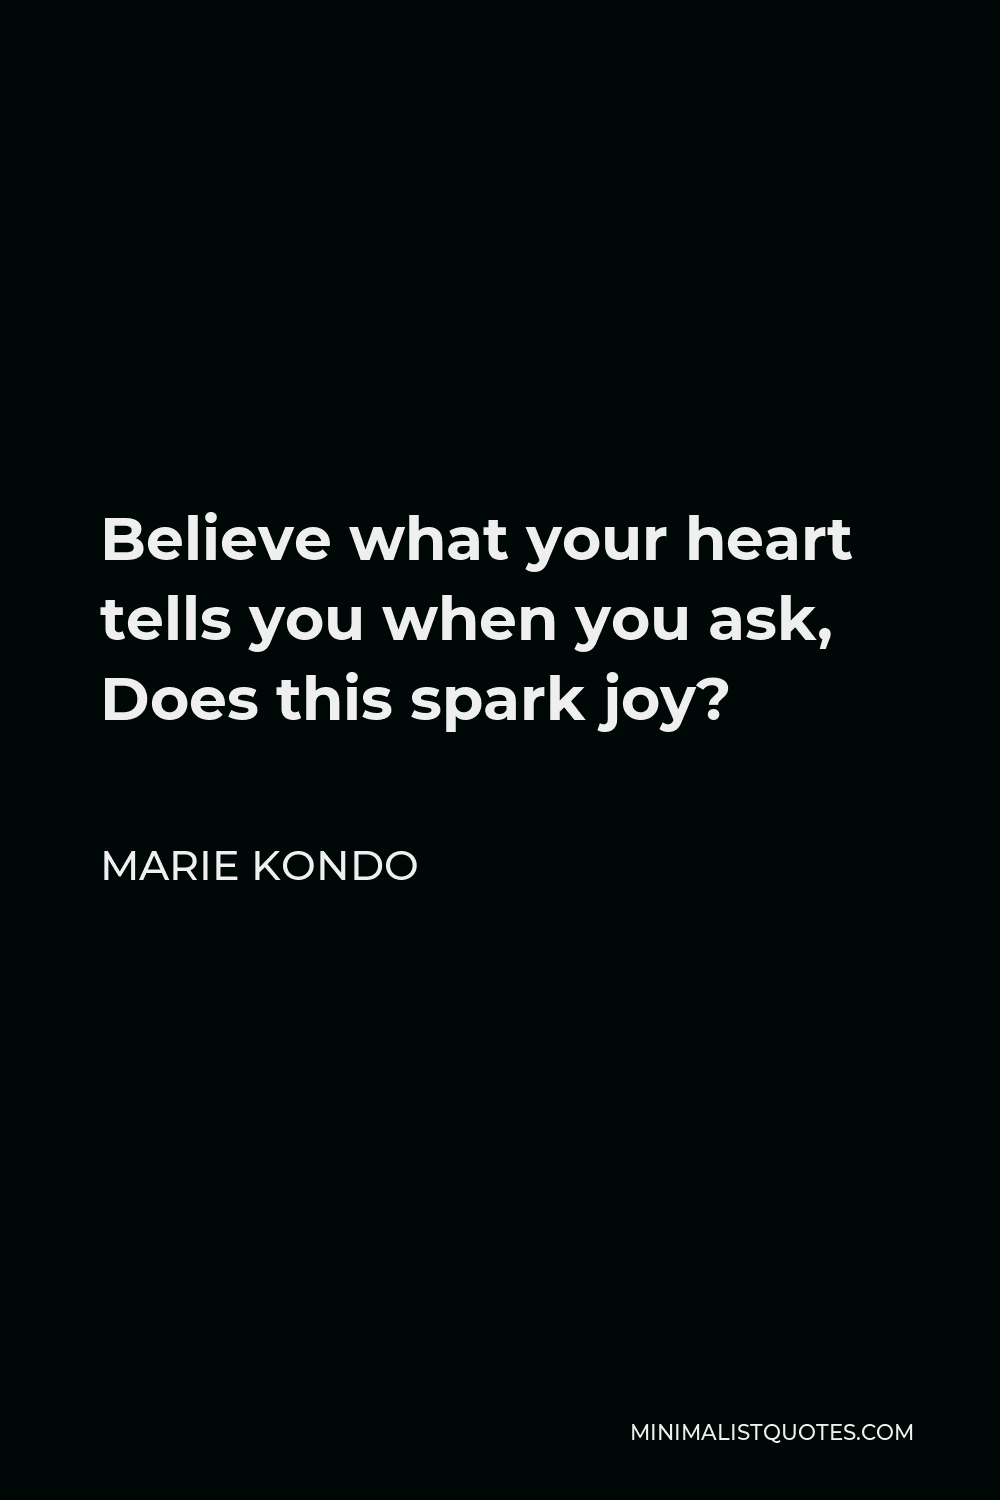 Marie Kondo Quote - Believe what your heart tells you when you ask, Does this spark joy?